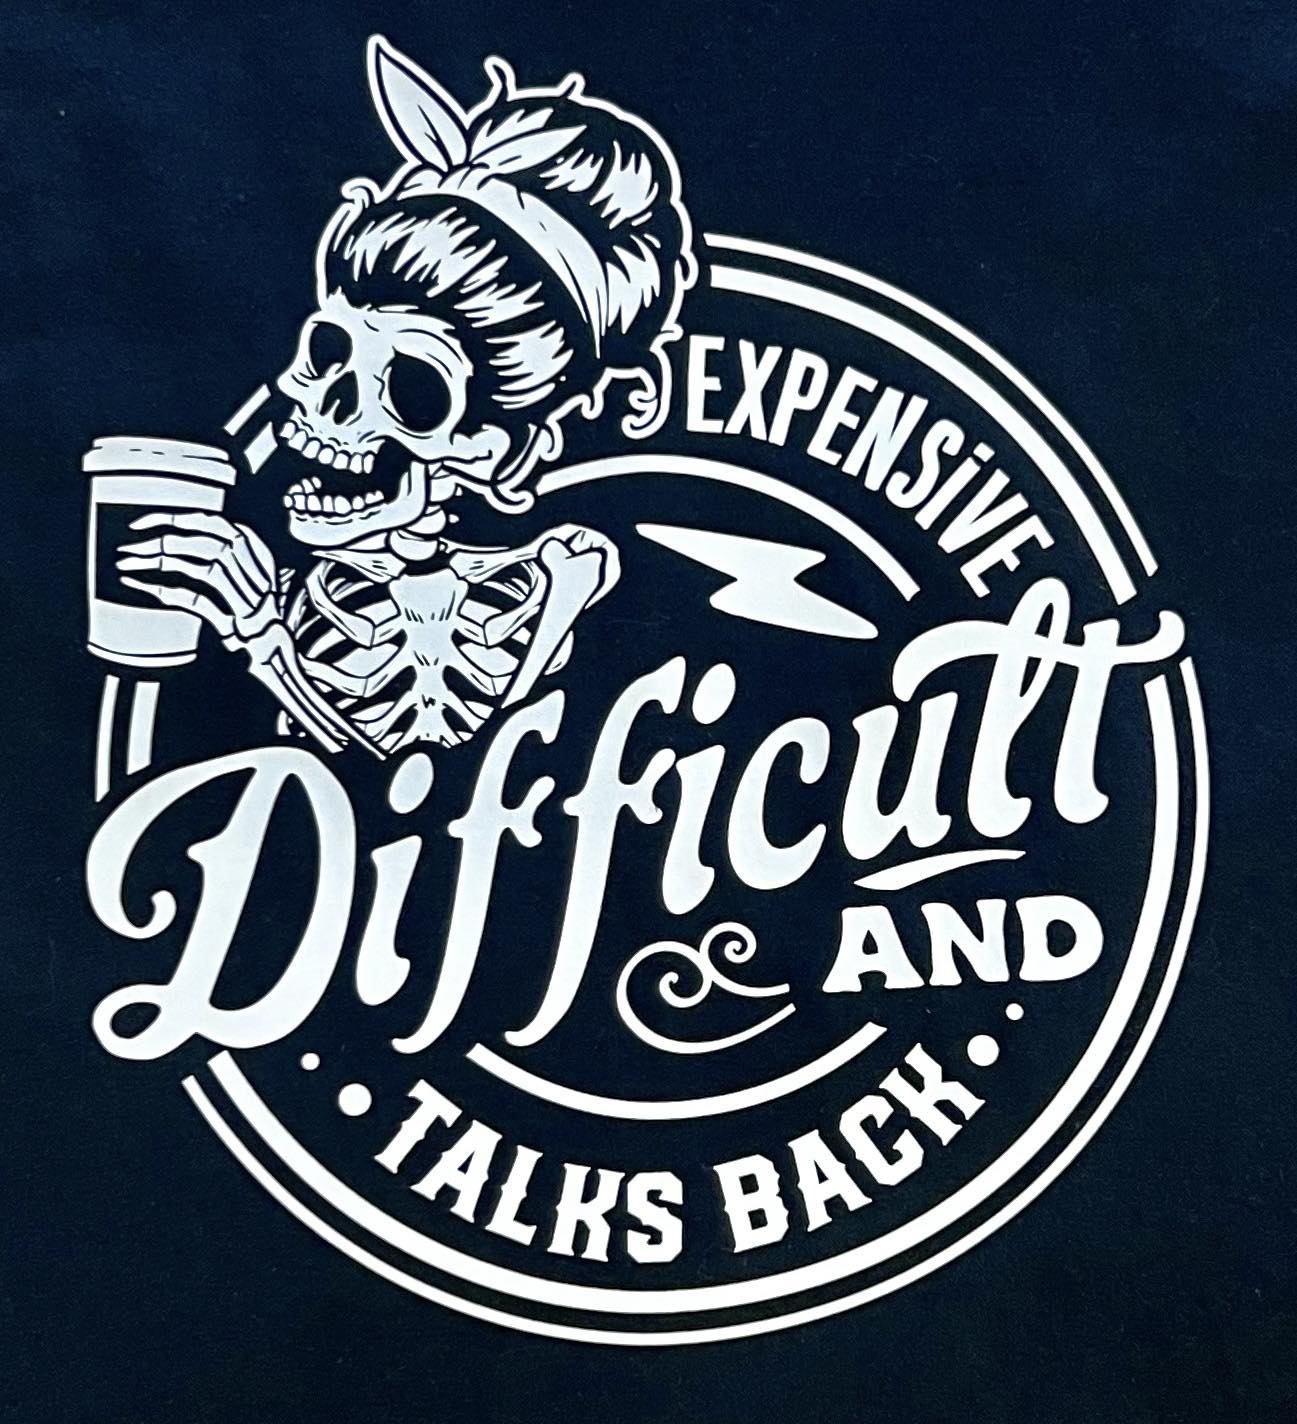 Women's Expensive Difficult and Talks Back Tee Shirt